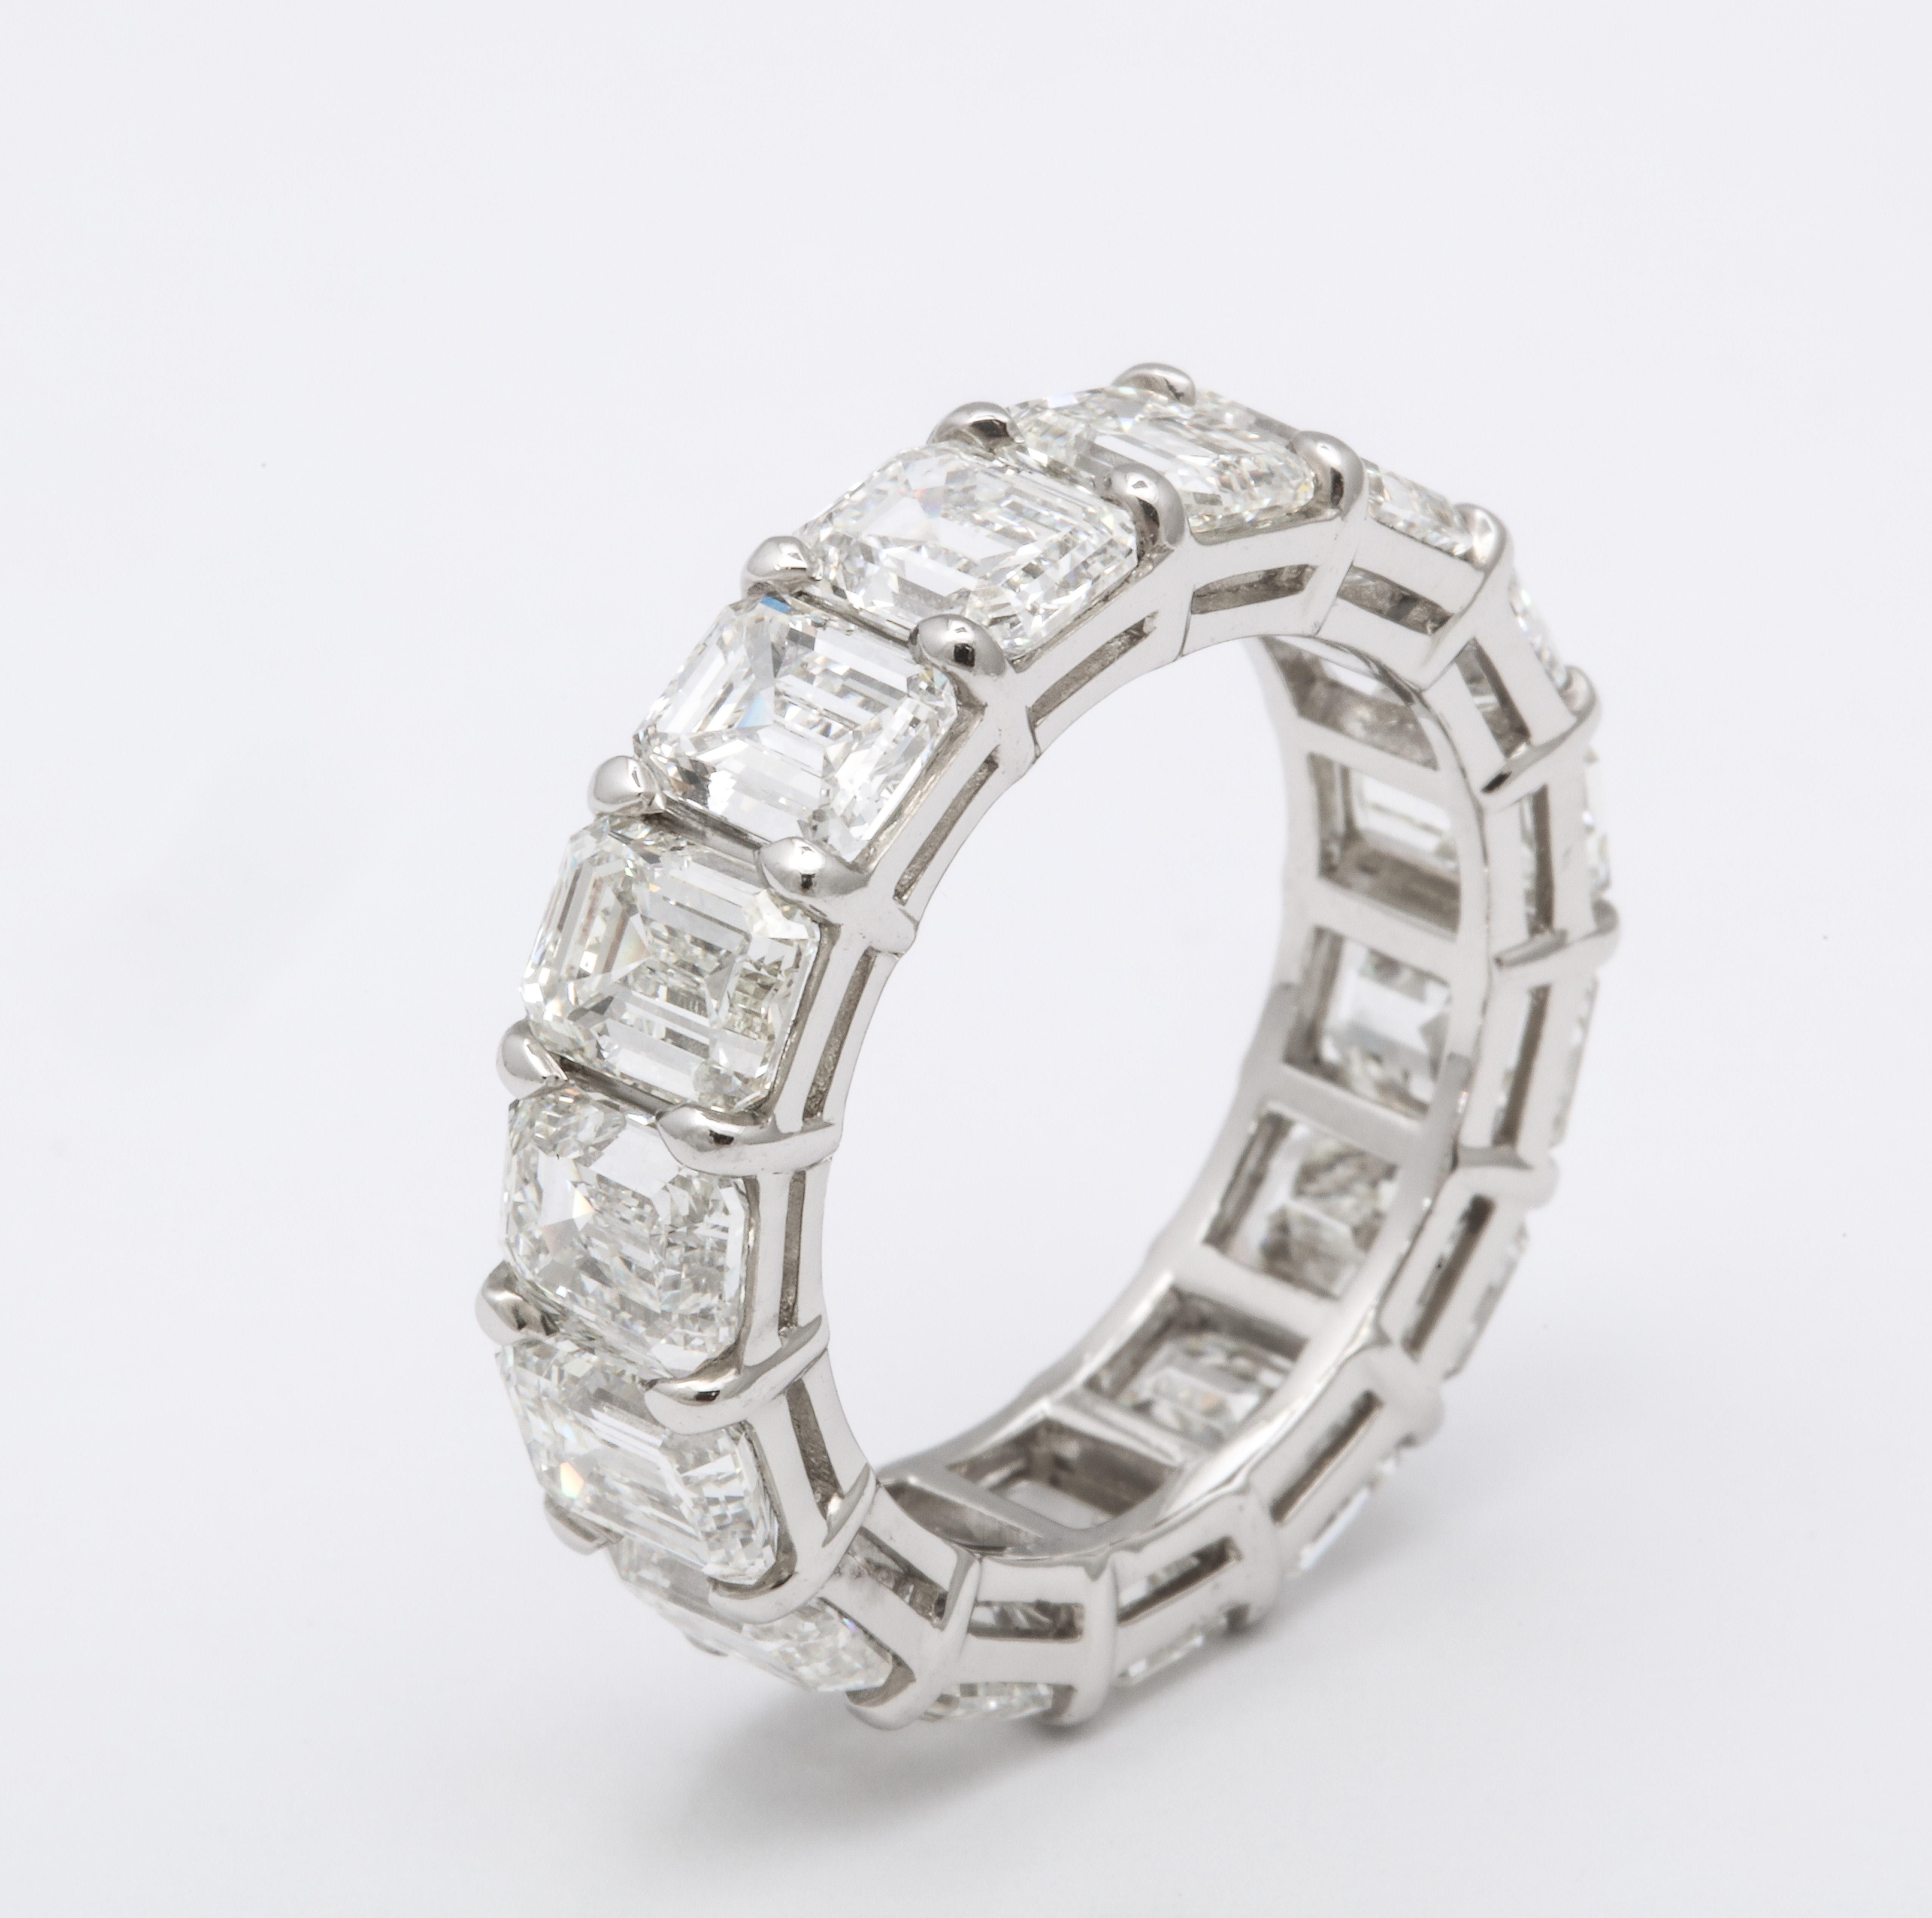 
A BEAUTIFUL eternity band!!

11.12 carats of colorless white, VS+ emerald cut diamonds set in a custom platinum band. 

6.2 mm wide

Currently a size 7+, this ring can easily be sized. 